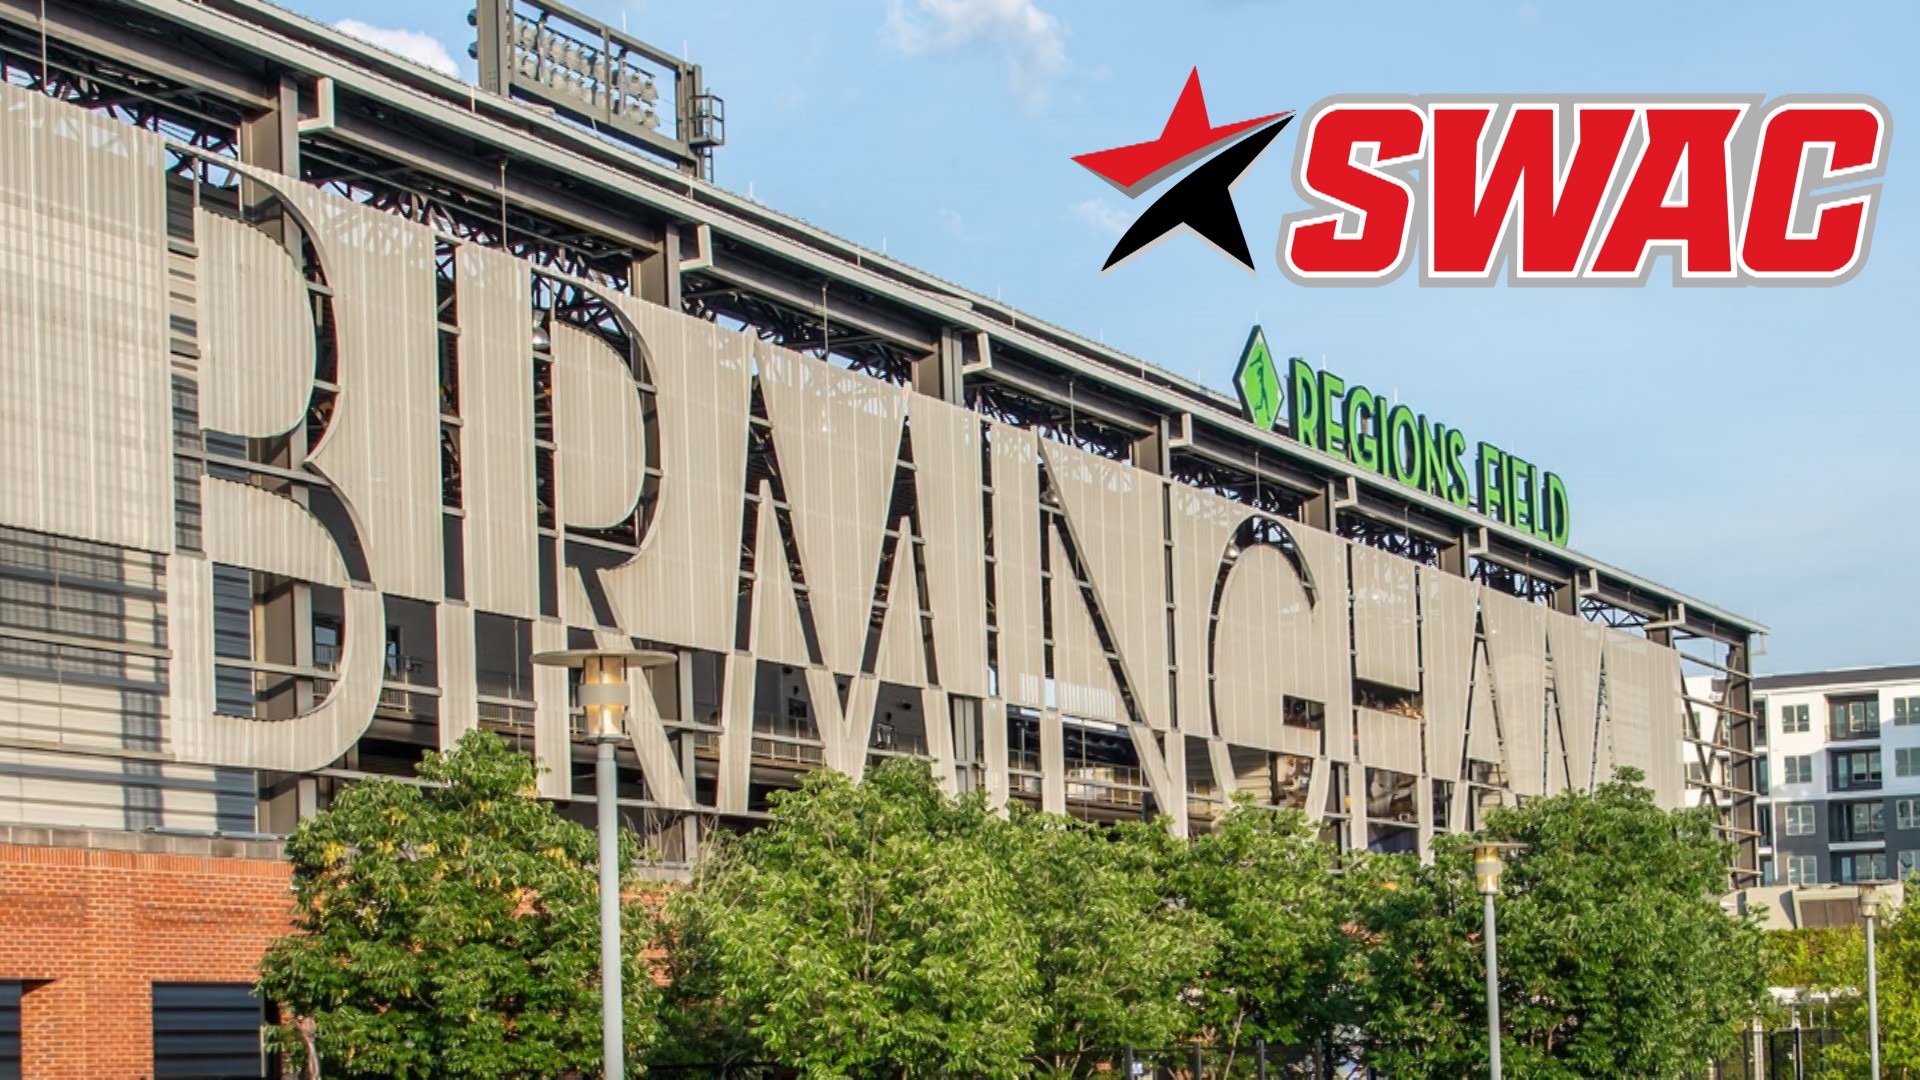 SWAC Baseball Tournament will be played at Regions Field